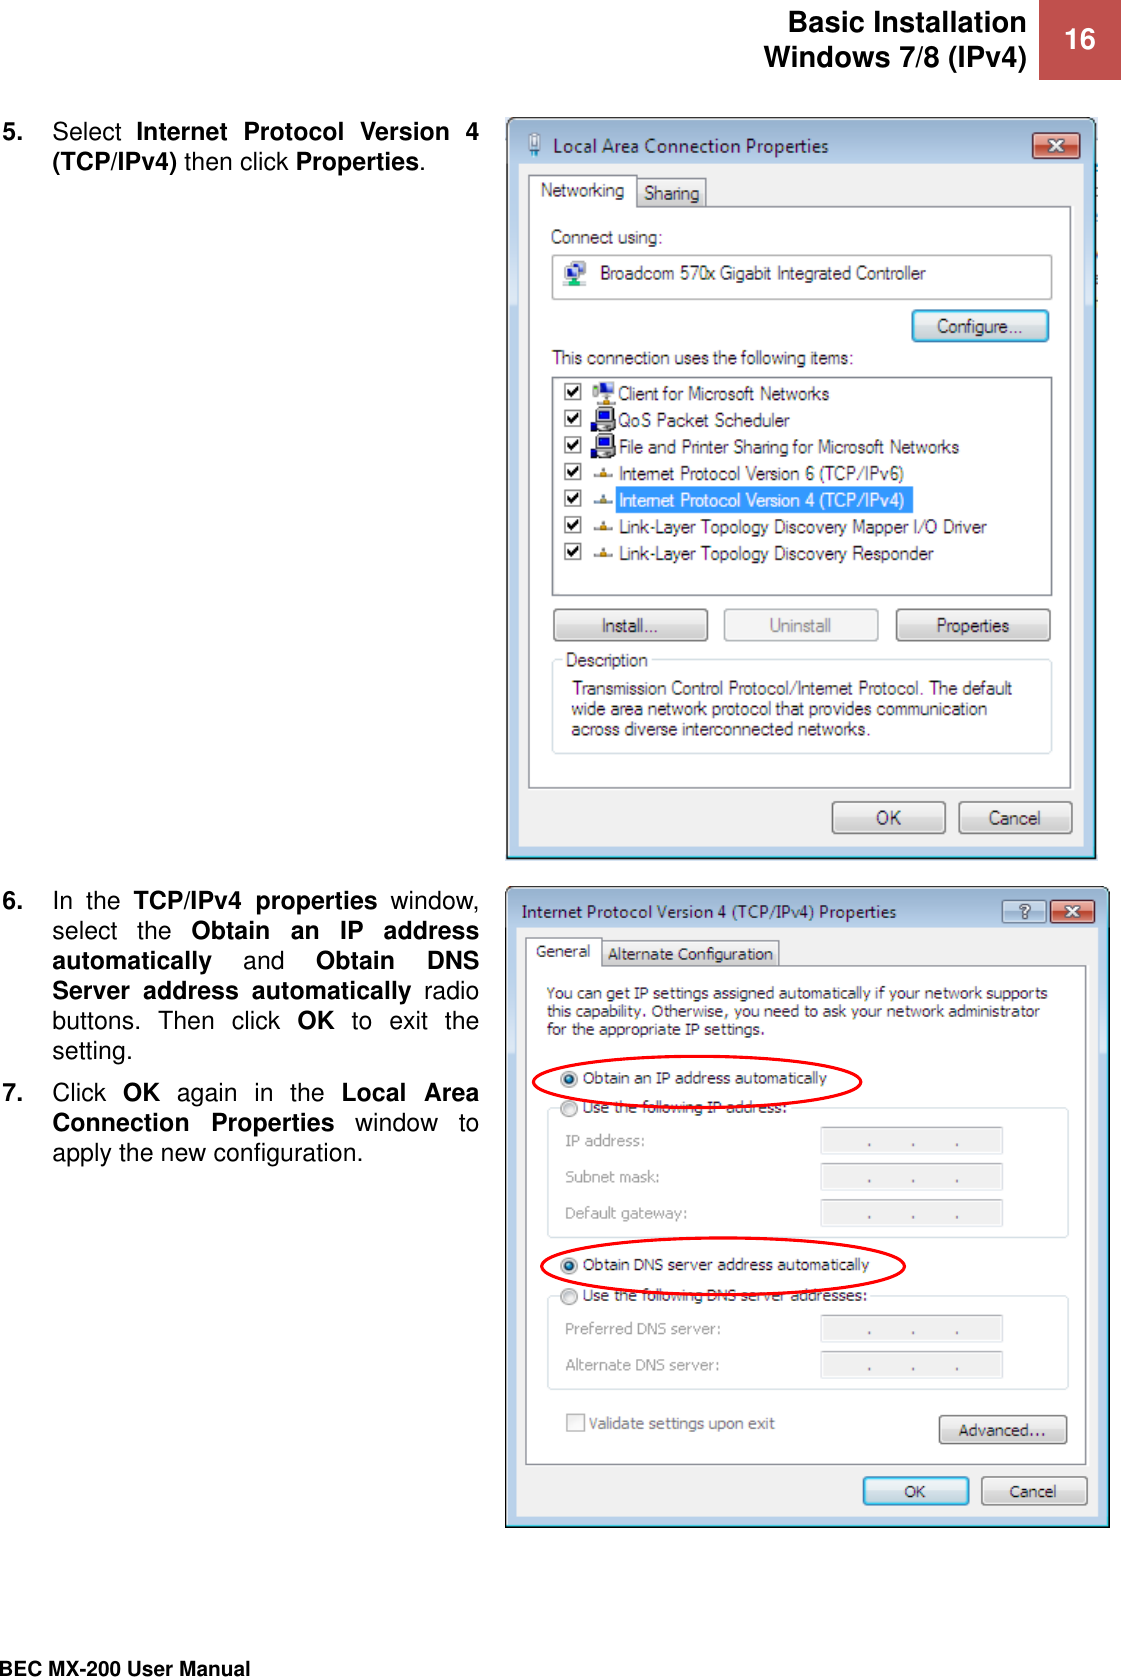 Basic Installation Windows 7/8 (IPv4) 16   BEC MX-200 User Manual  5. Select  Internet  Protocol  Version  4 (TCP/IPv4) then click Properties.   6. In  the  TCP/IPv4  properties  window, select  the  Obtain  an  IP  address automatically  and  Obtain  DNS Server  address  automatically  radio buttons.  Then  click  OK  to  exit  the setting. 7. Click  OK  again  in  the  Local  Area Connection  Properties  window  to apply the new configuration.   